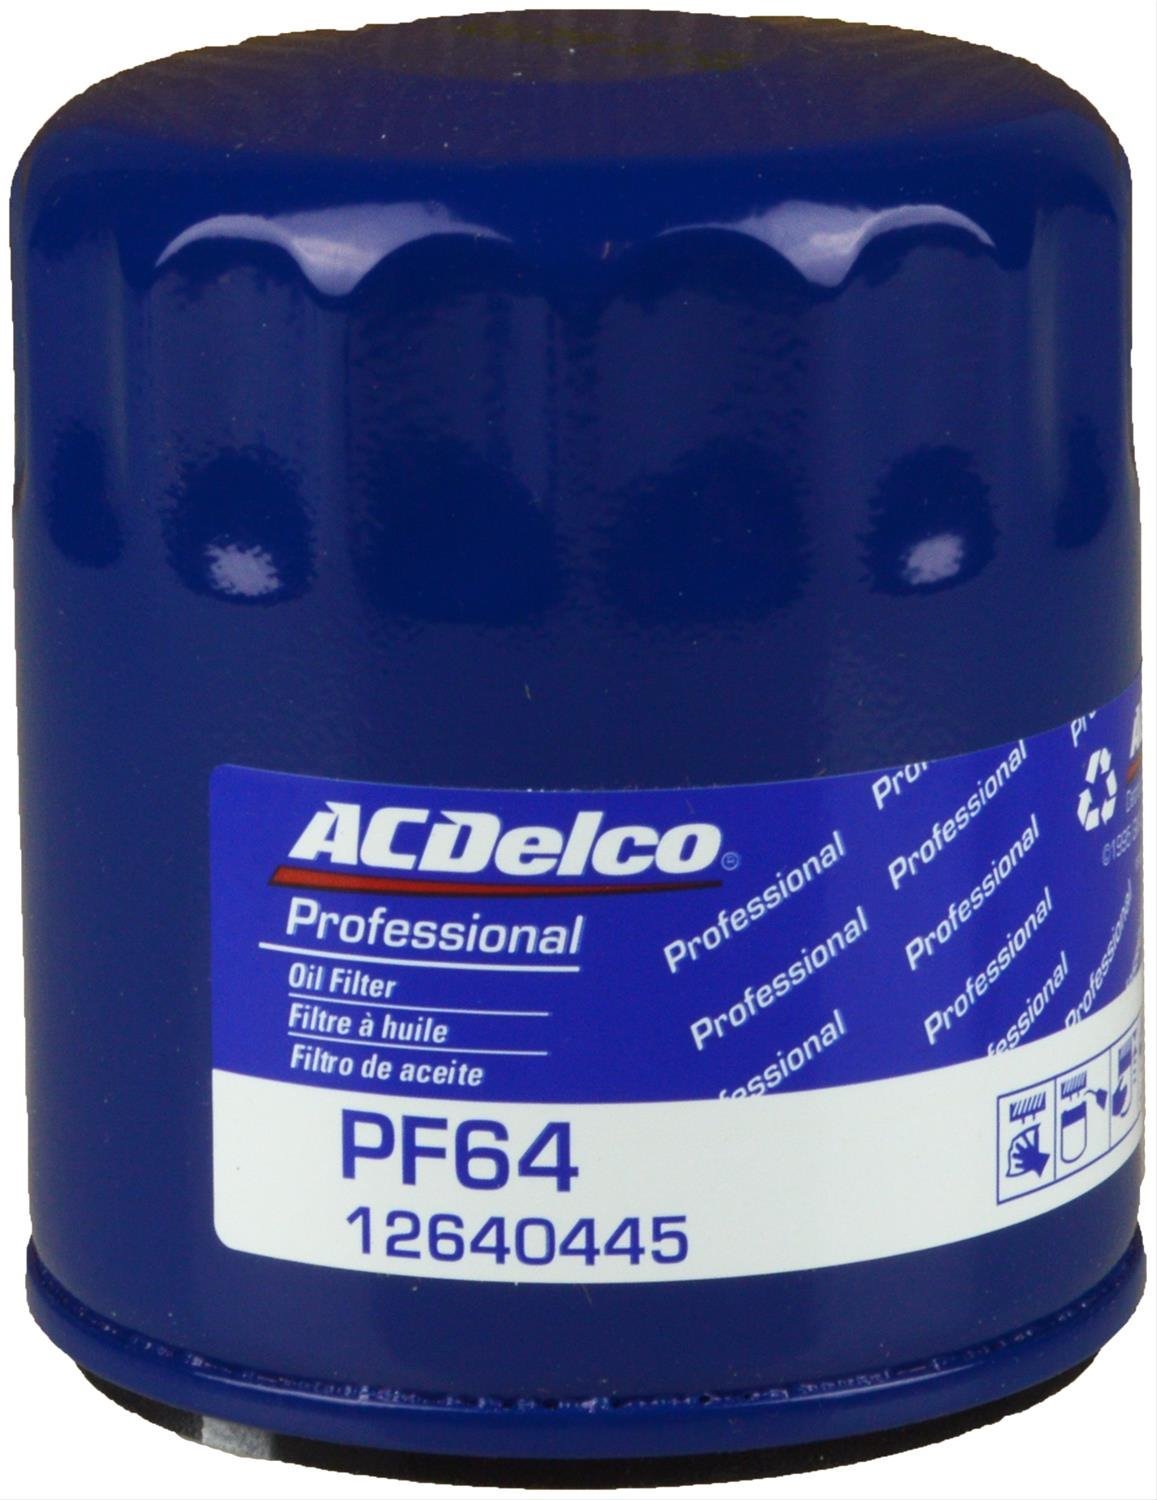 PF64 Professional Engine Oil Filter for Buick, Cadillac,